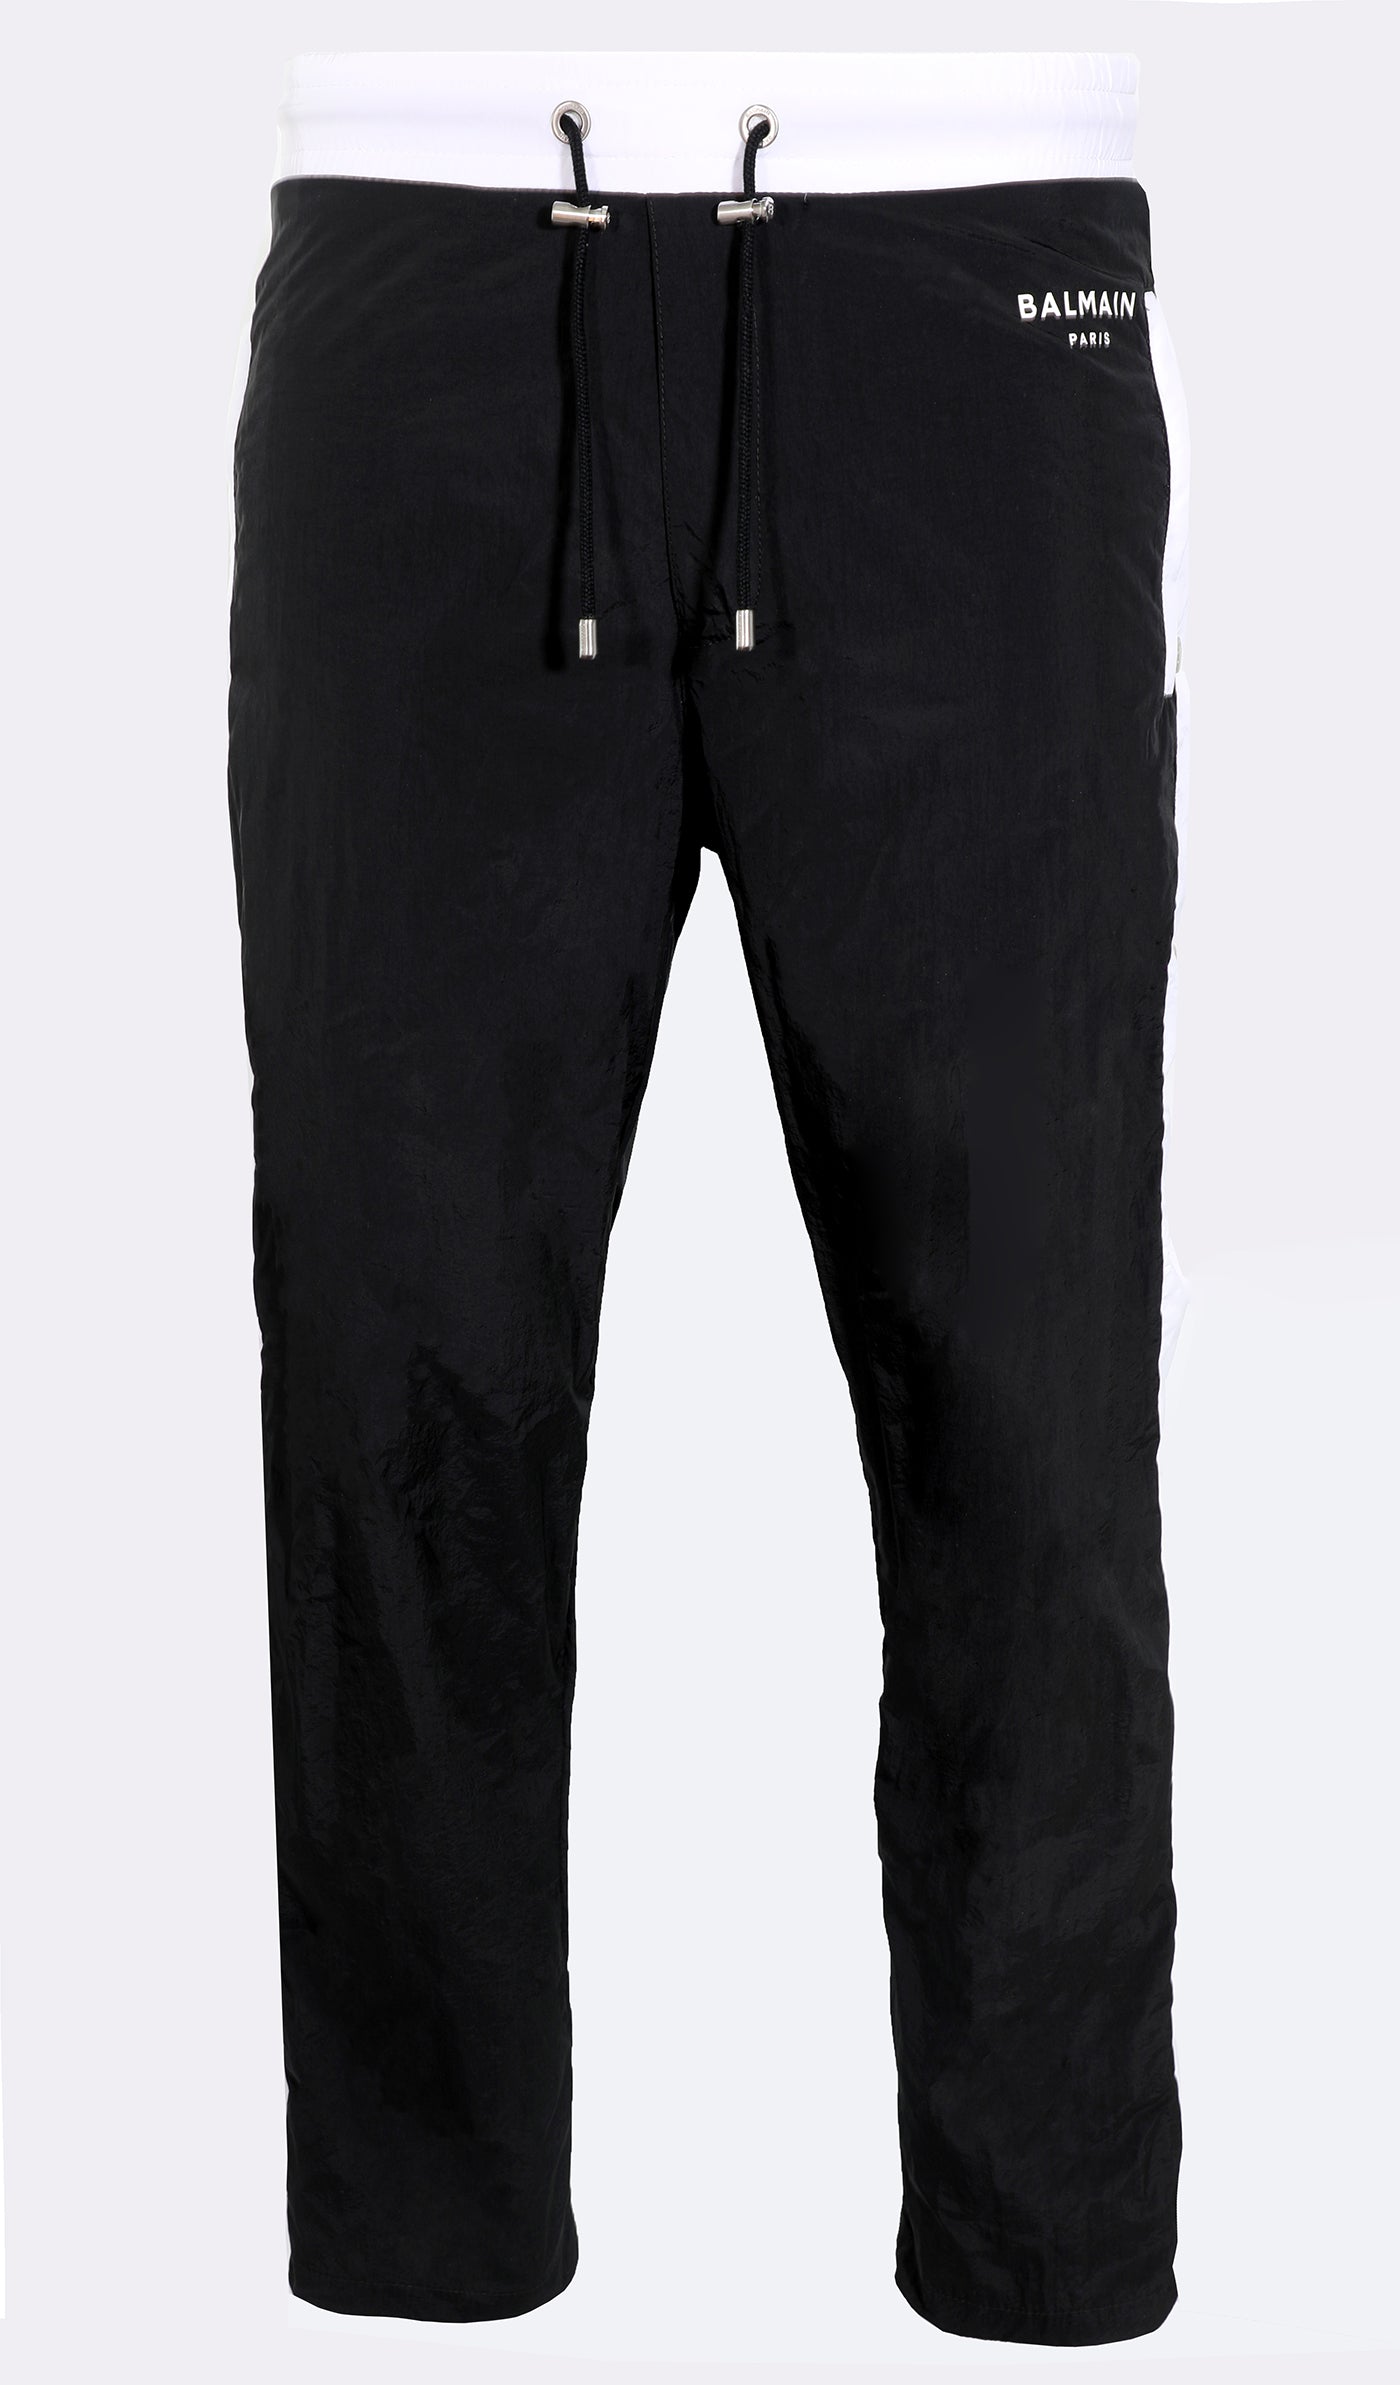 NYLON SNAPPED TRACKPANTS - BLACK AND WHITE